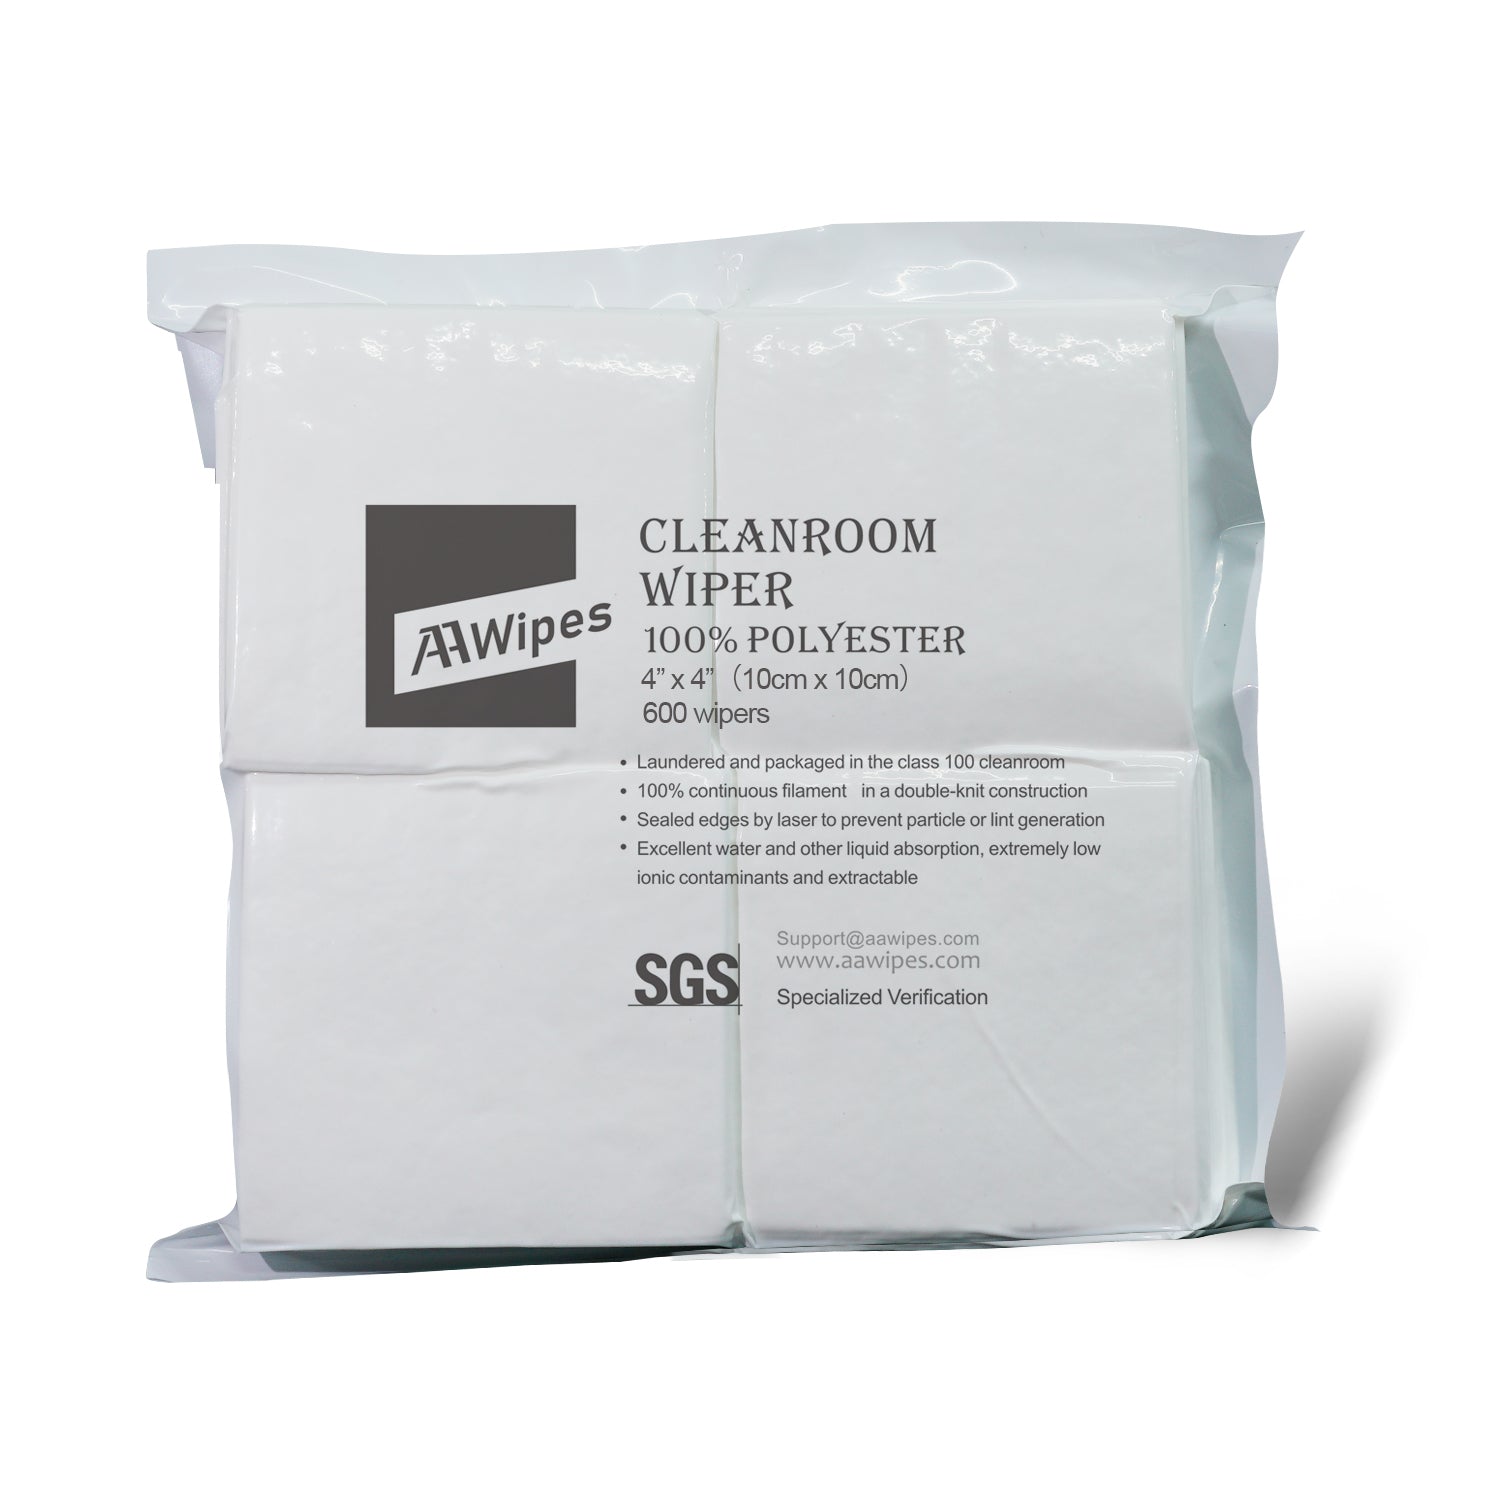 Cleanroom Wipers 4"x4" Double Knit 100% Polyester Wipes Lint Free Cloths with Ultra-fine Filaments, Laser Sealed Edge, Class 10-100 cleanrooms (ISO Class 4-5), Ultra-Soft Wipes for Sensitive Optics. 8,800 wipes/box, 22 bags (No. CP14004).